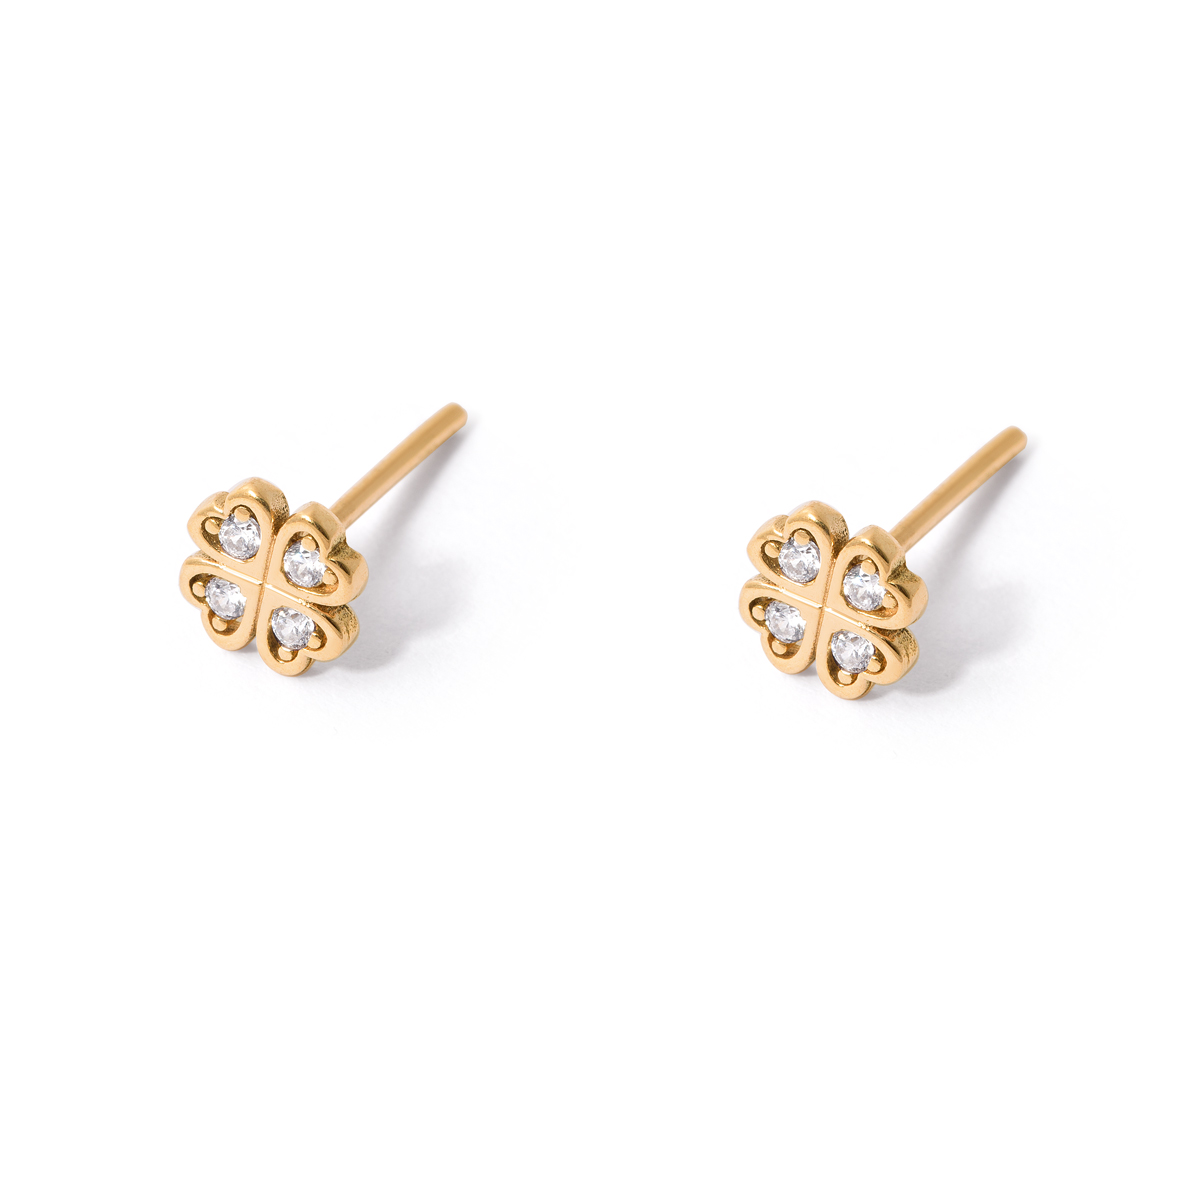 Gold earrings with jeweled clover g